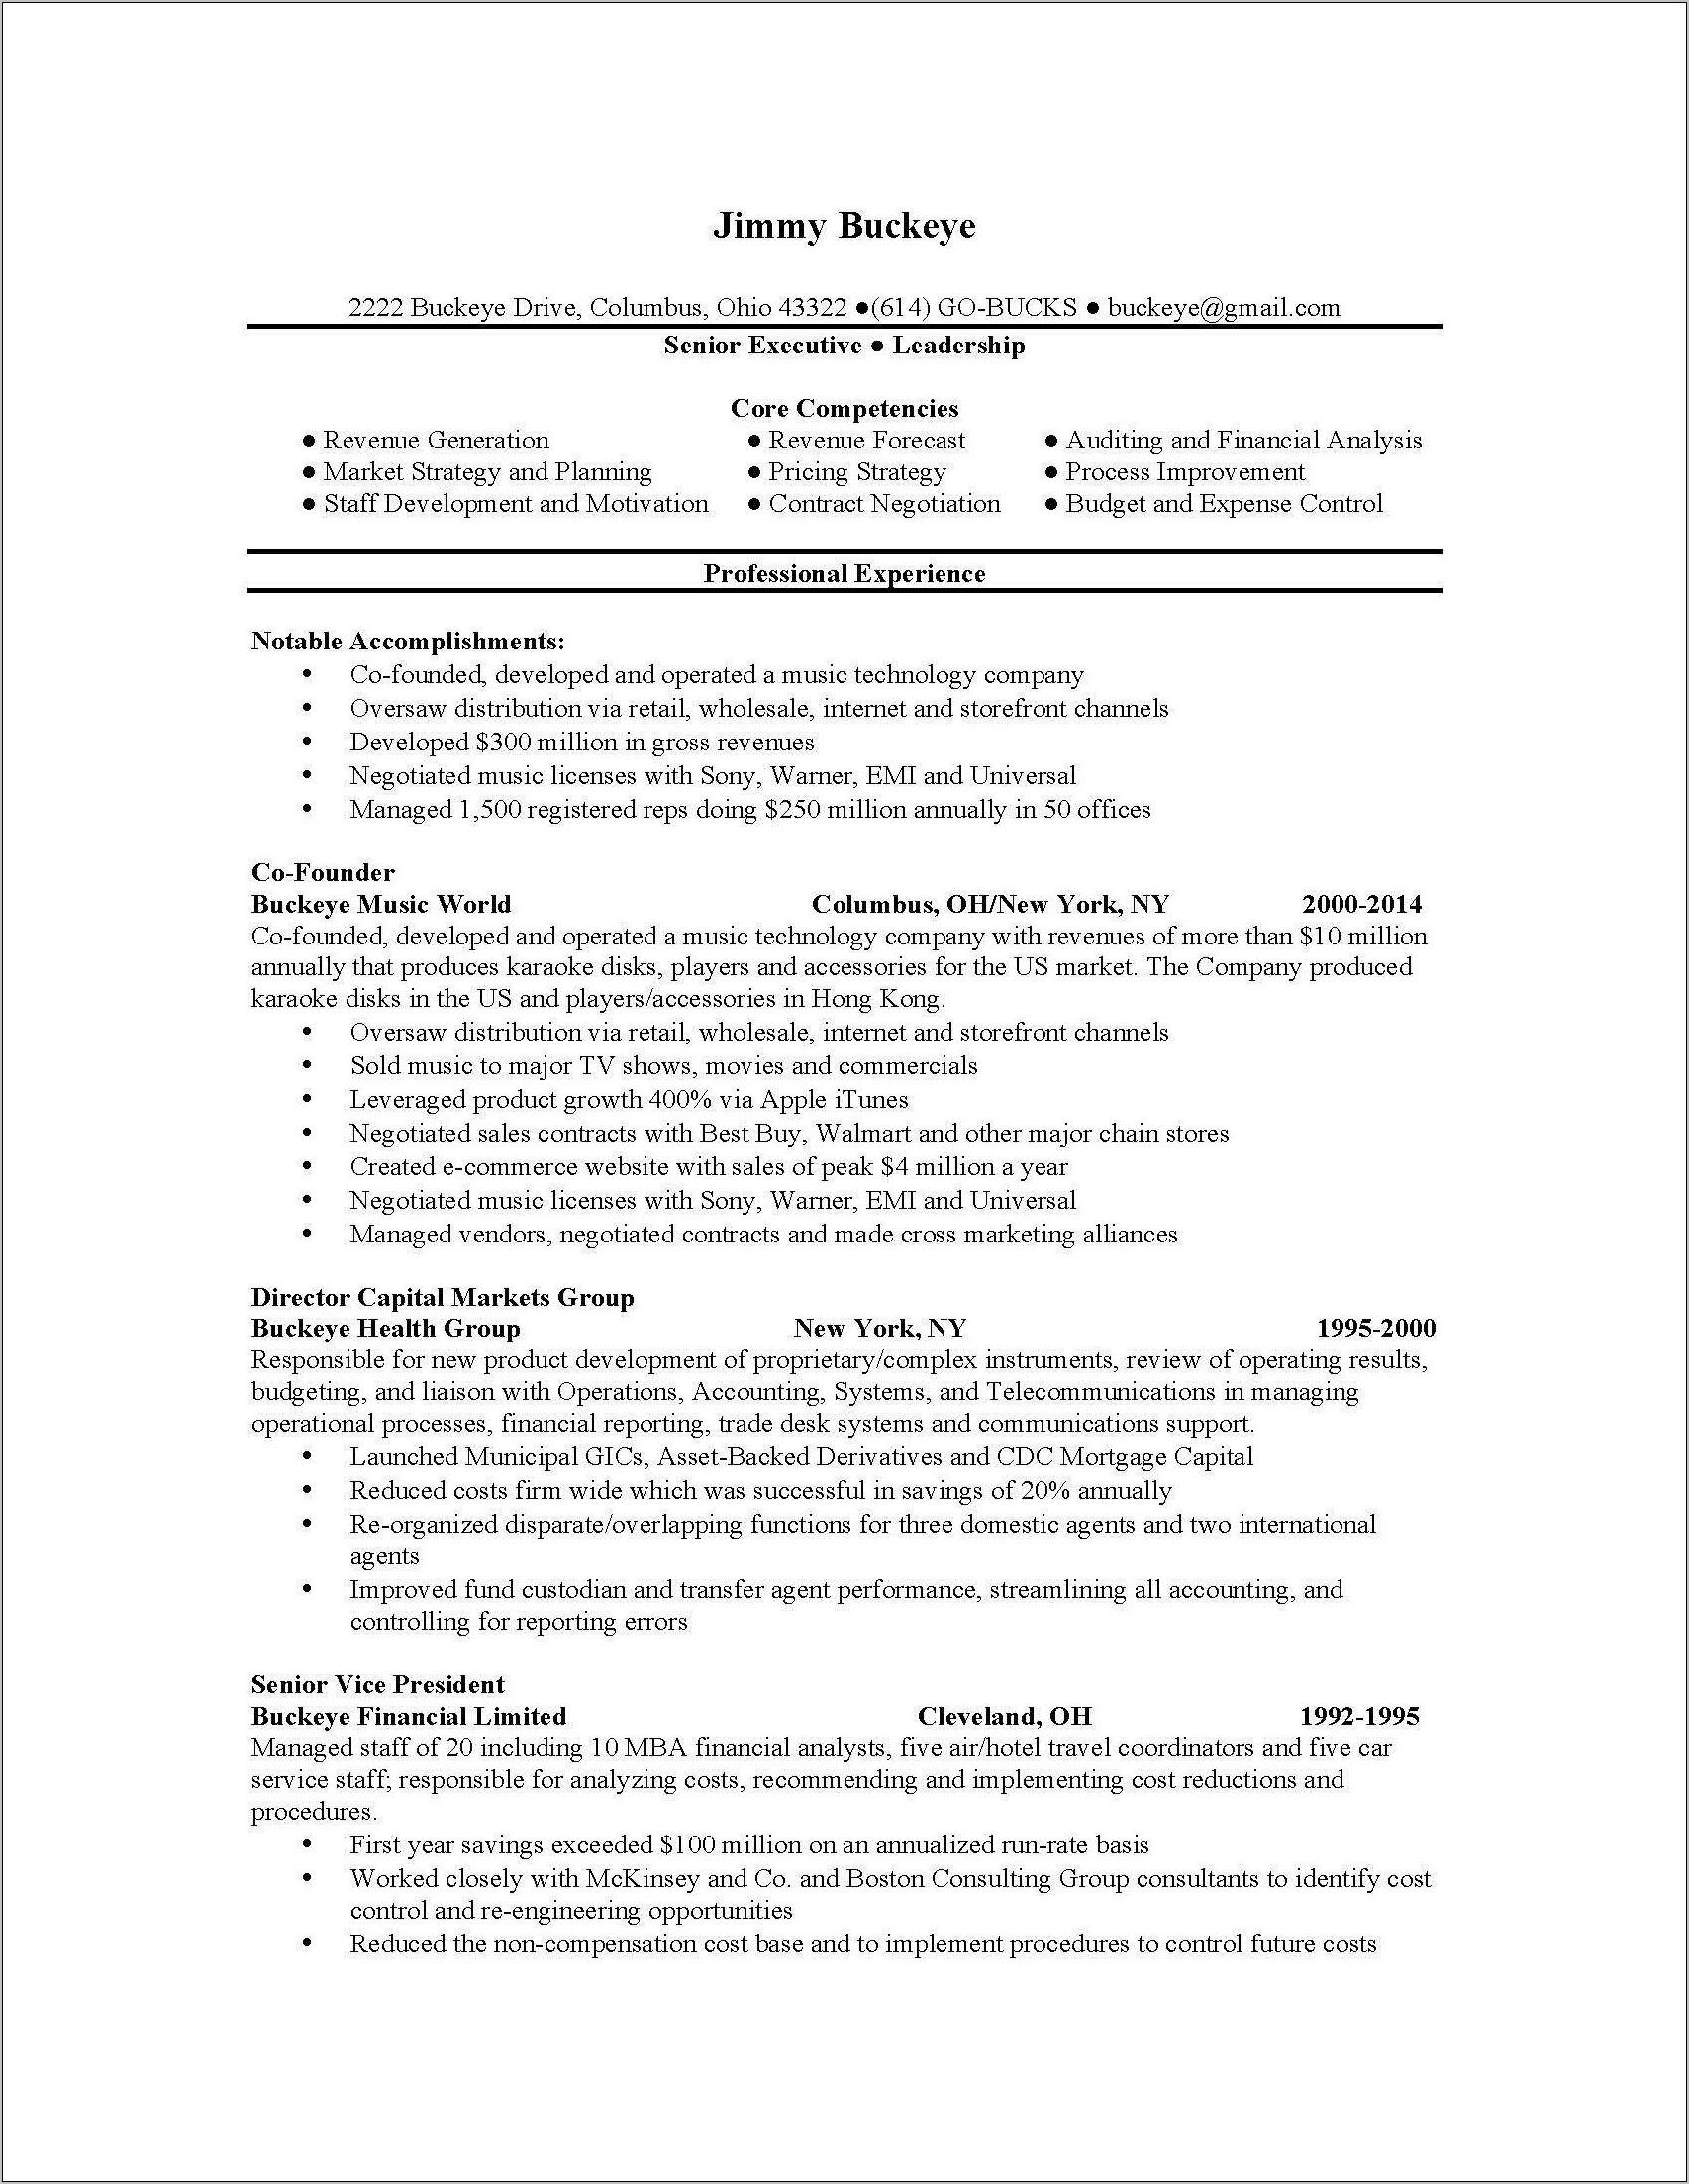 Sample Professional Resumes And Cover Letters